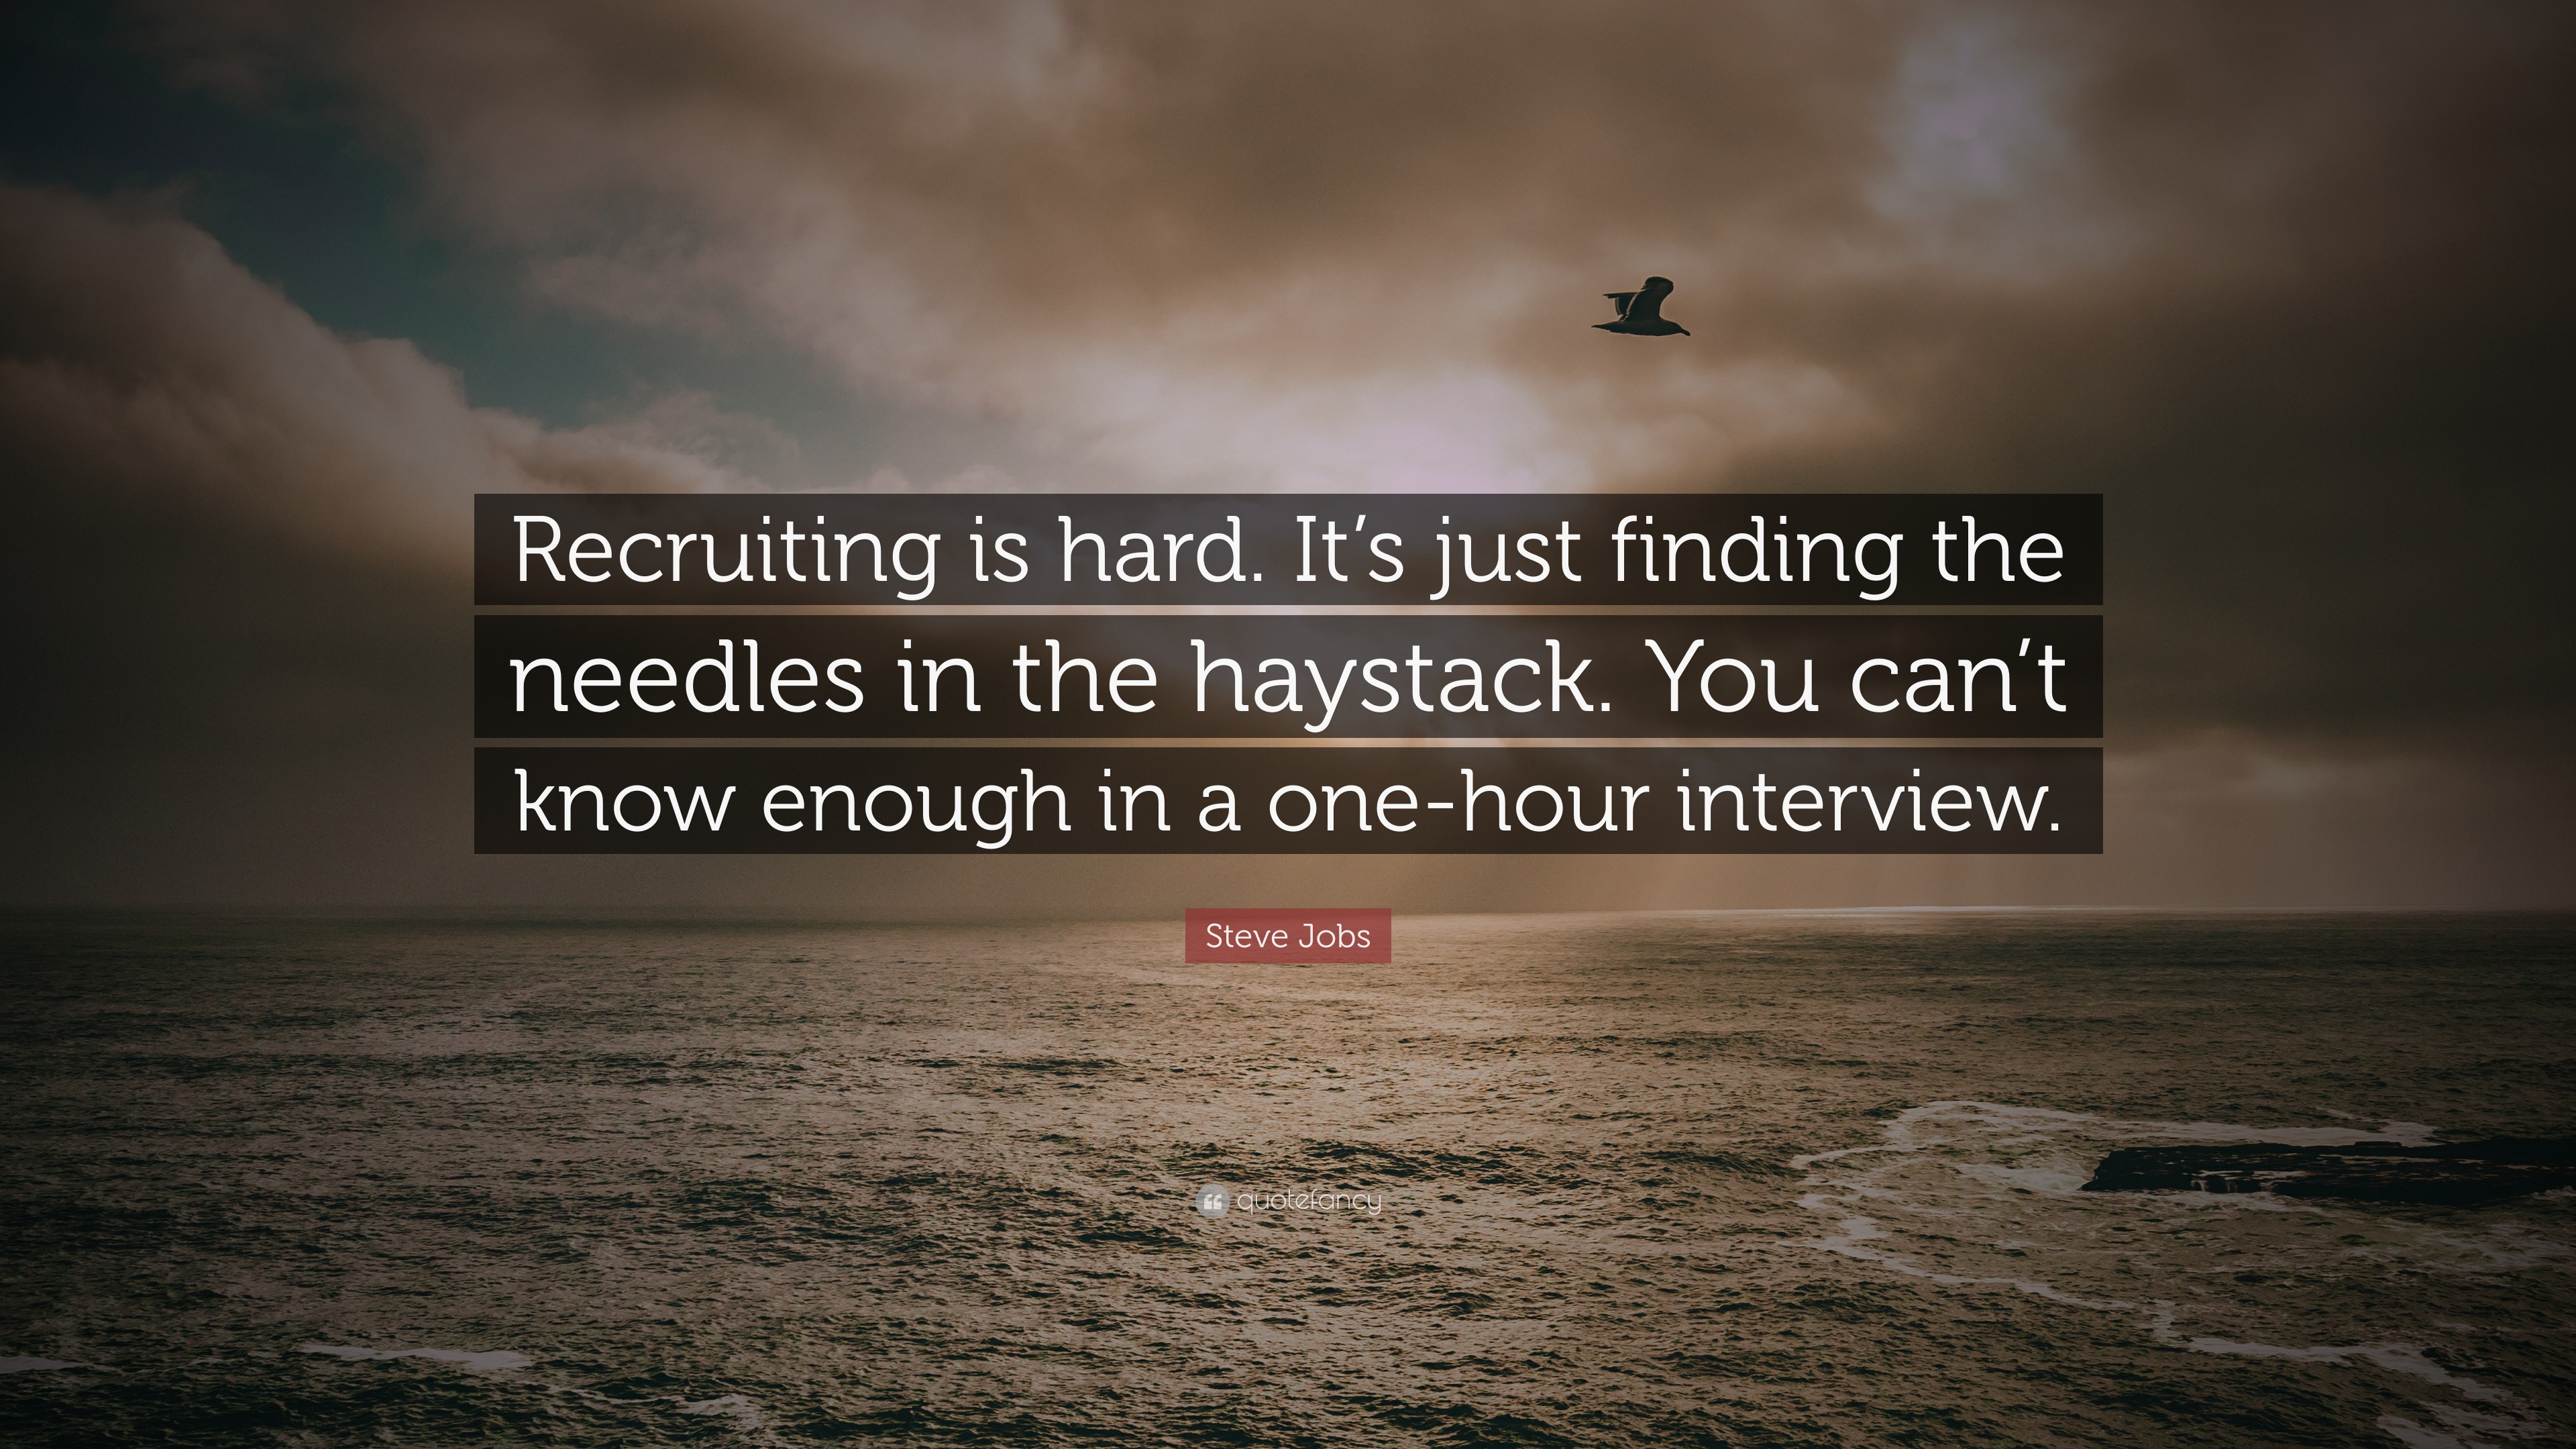 Steve Jobs Quote: “Recruiting is hard. It’s just finding the needles in